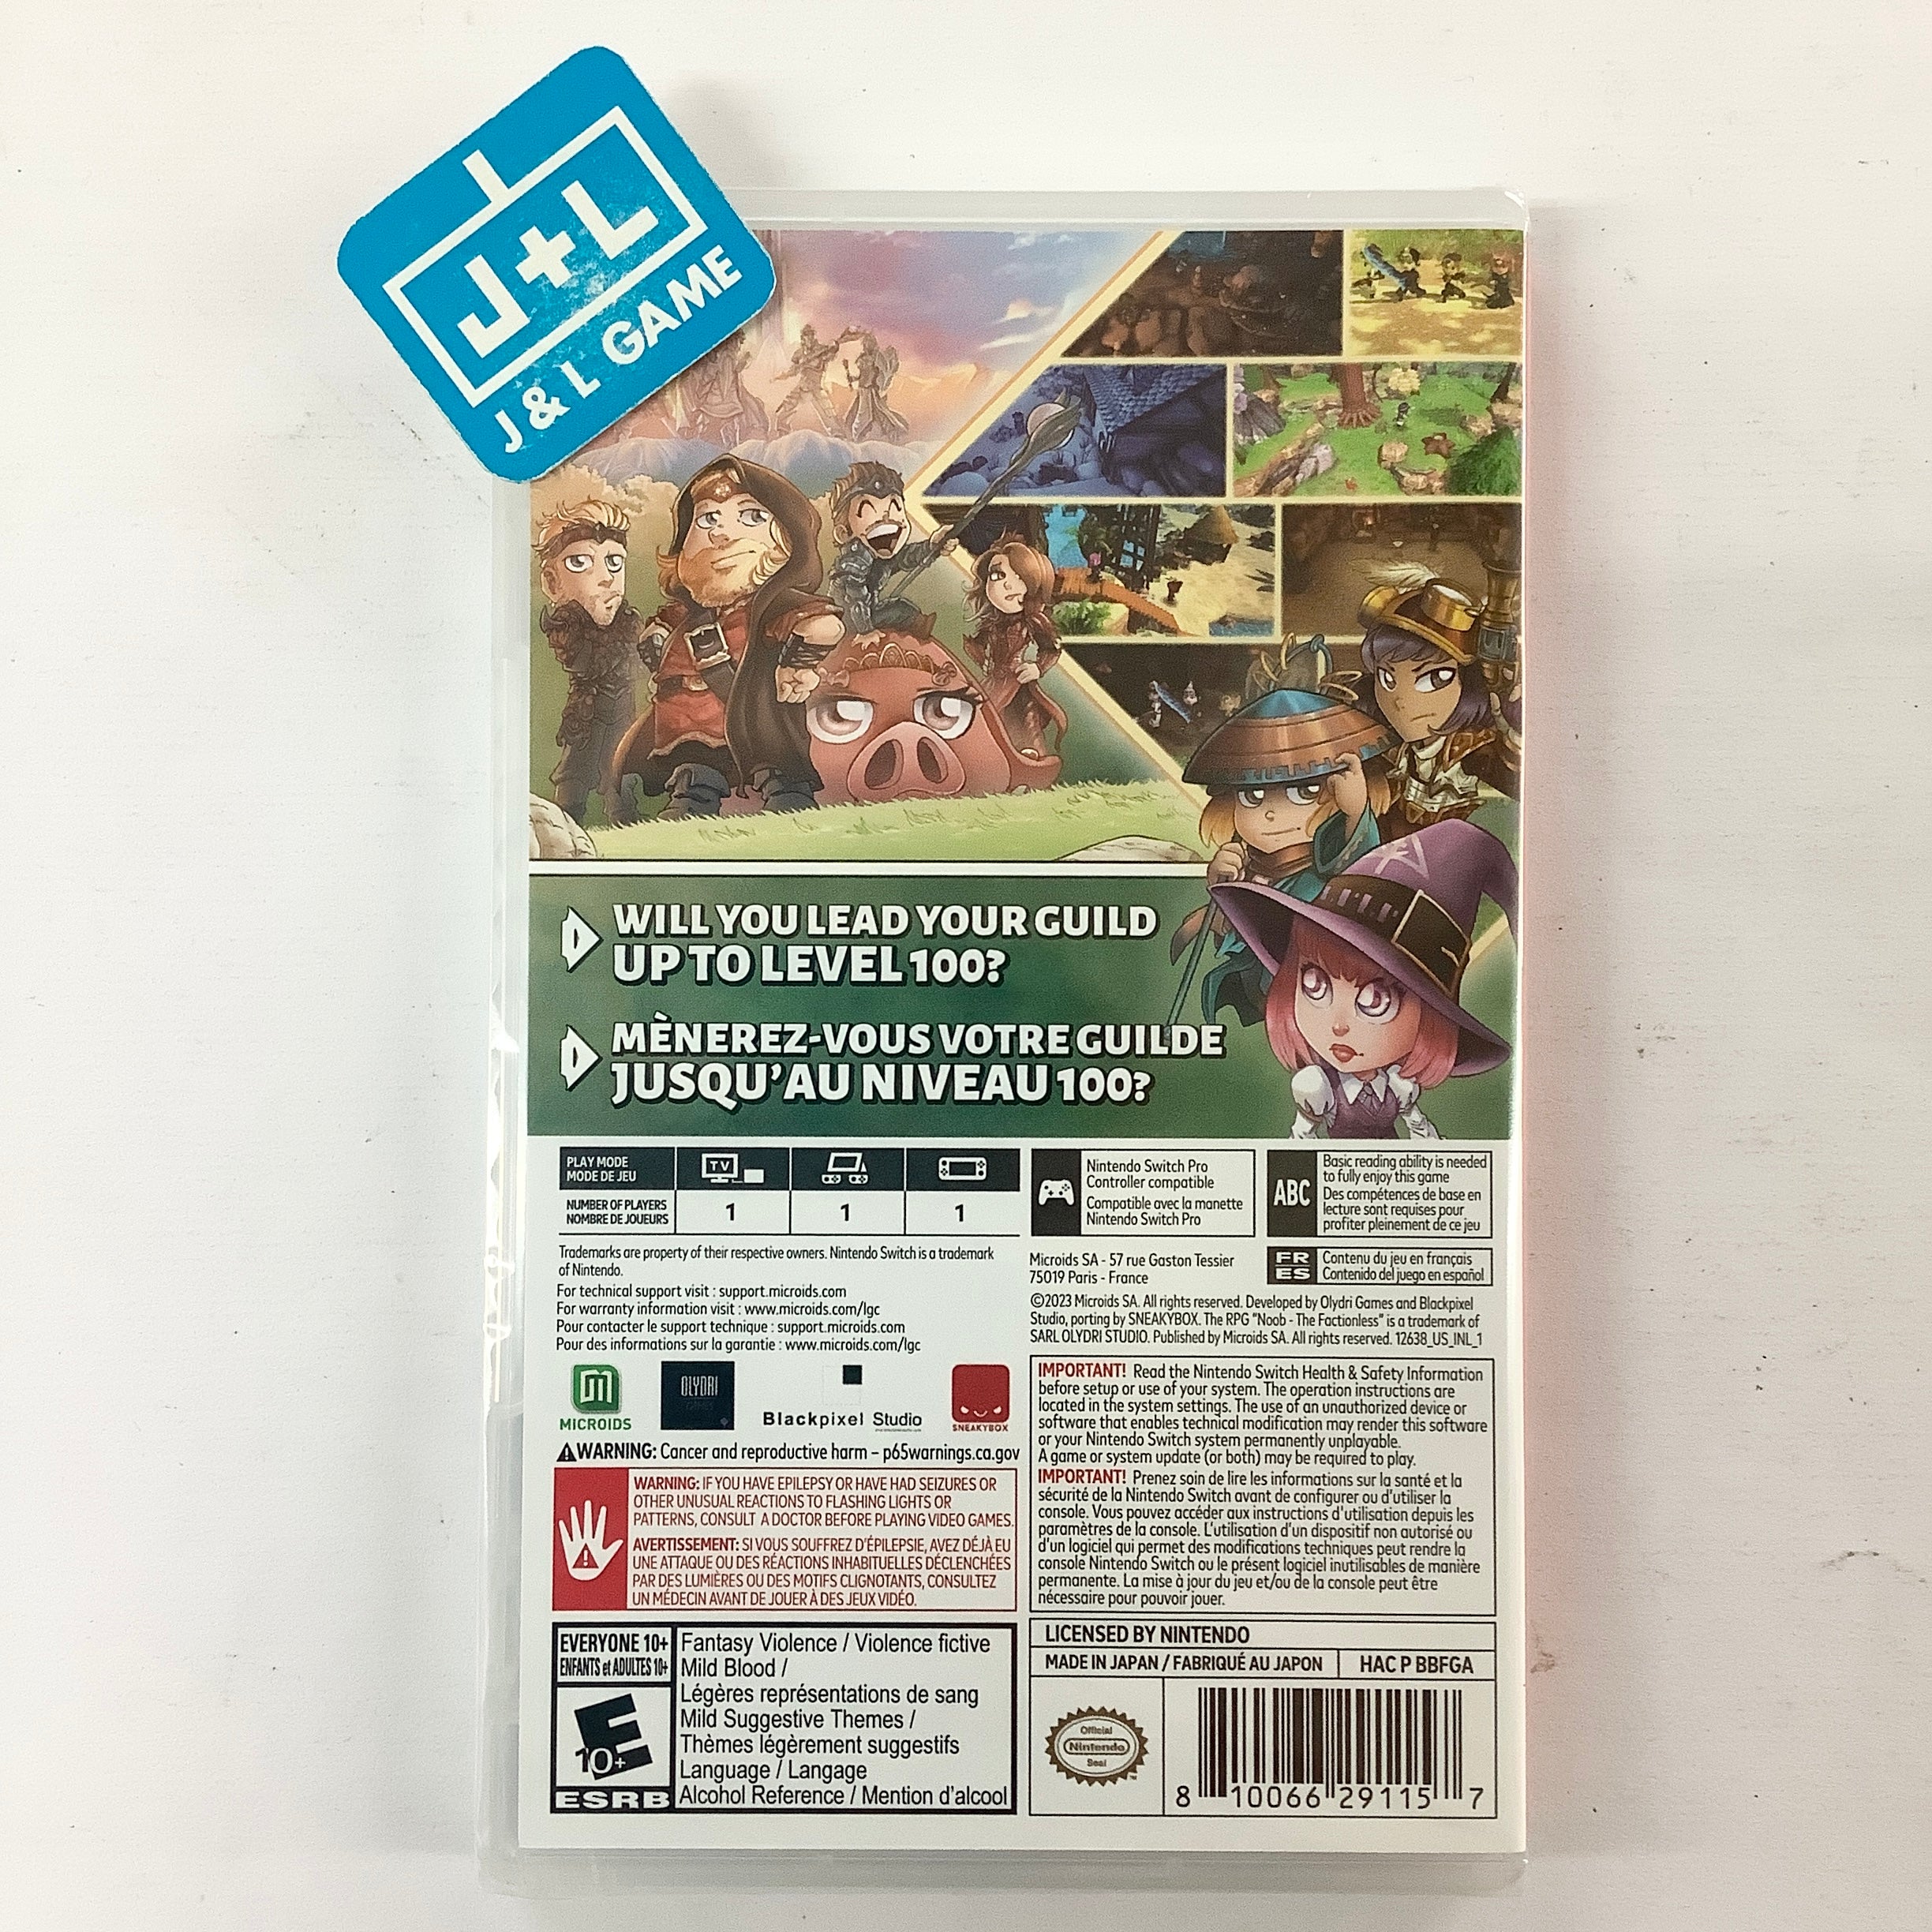 NOOB: The Factionless - (NSW) Nintendo Switch Video Games Microids   